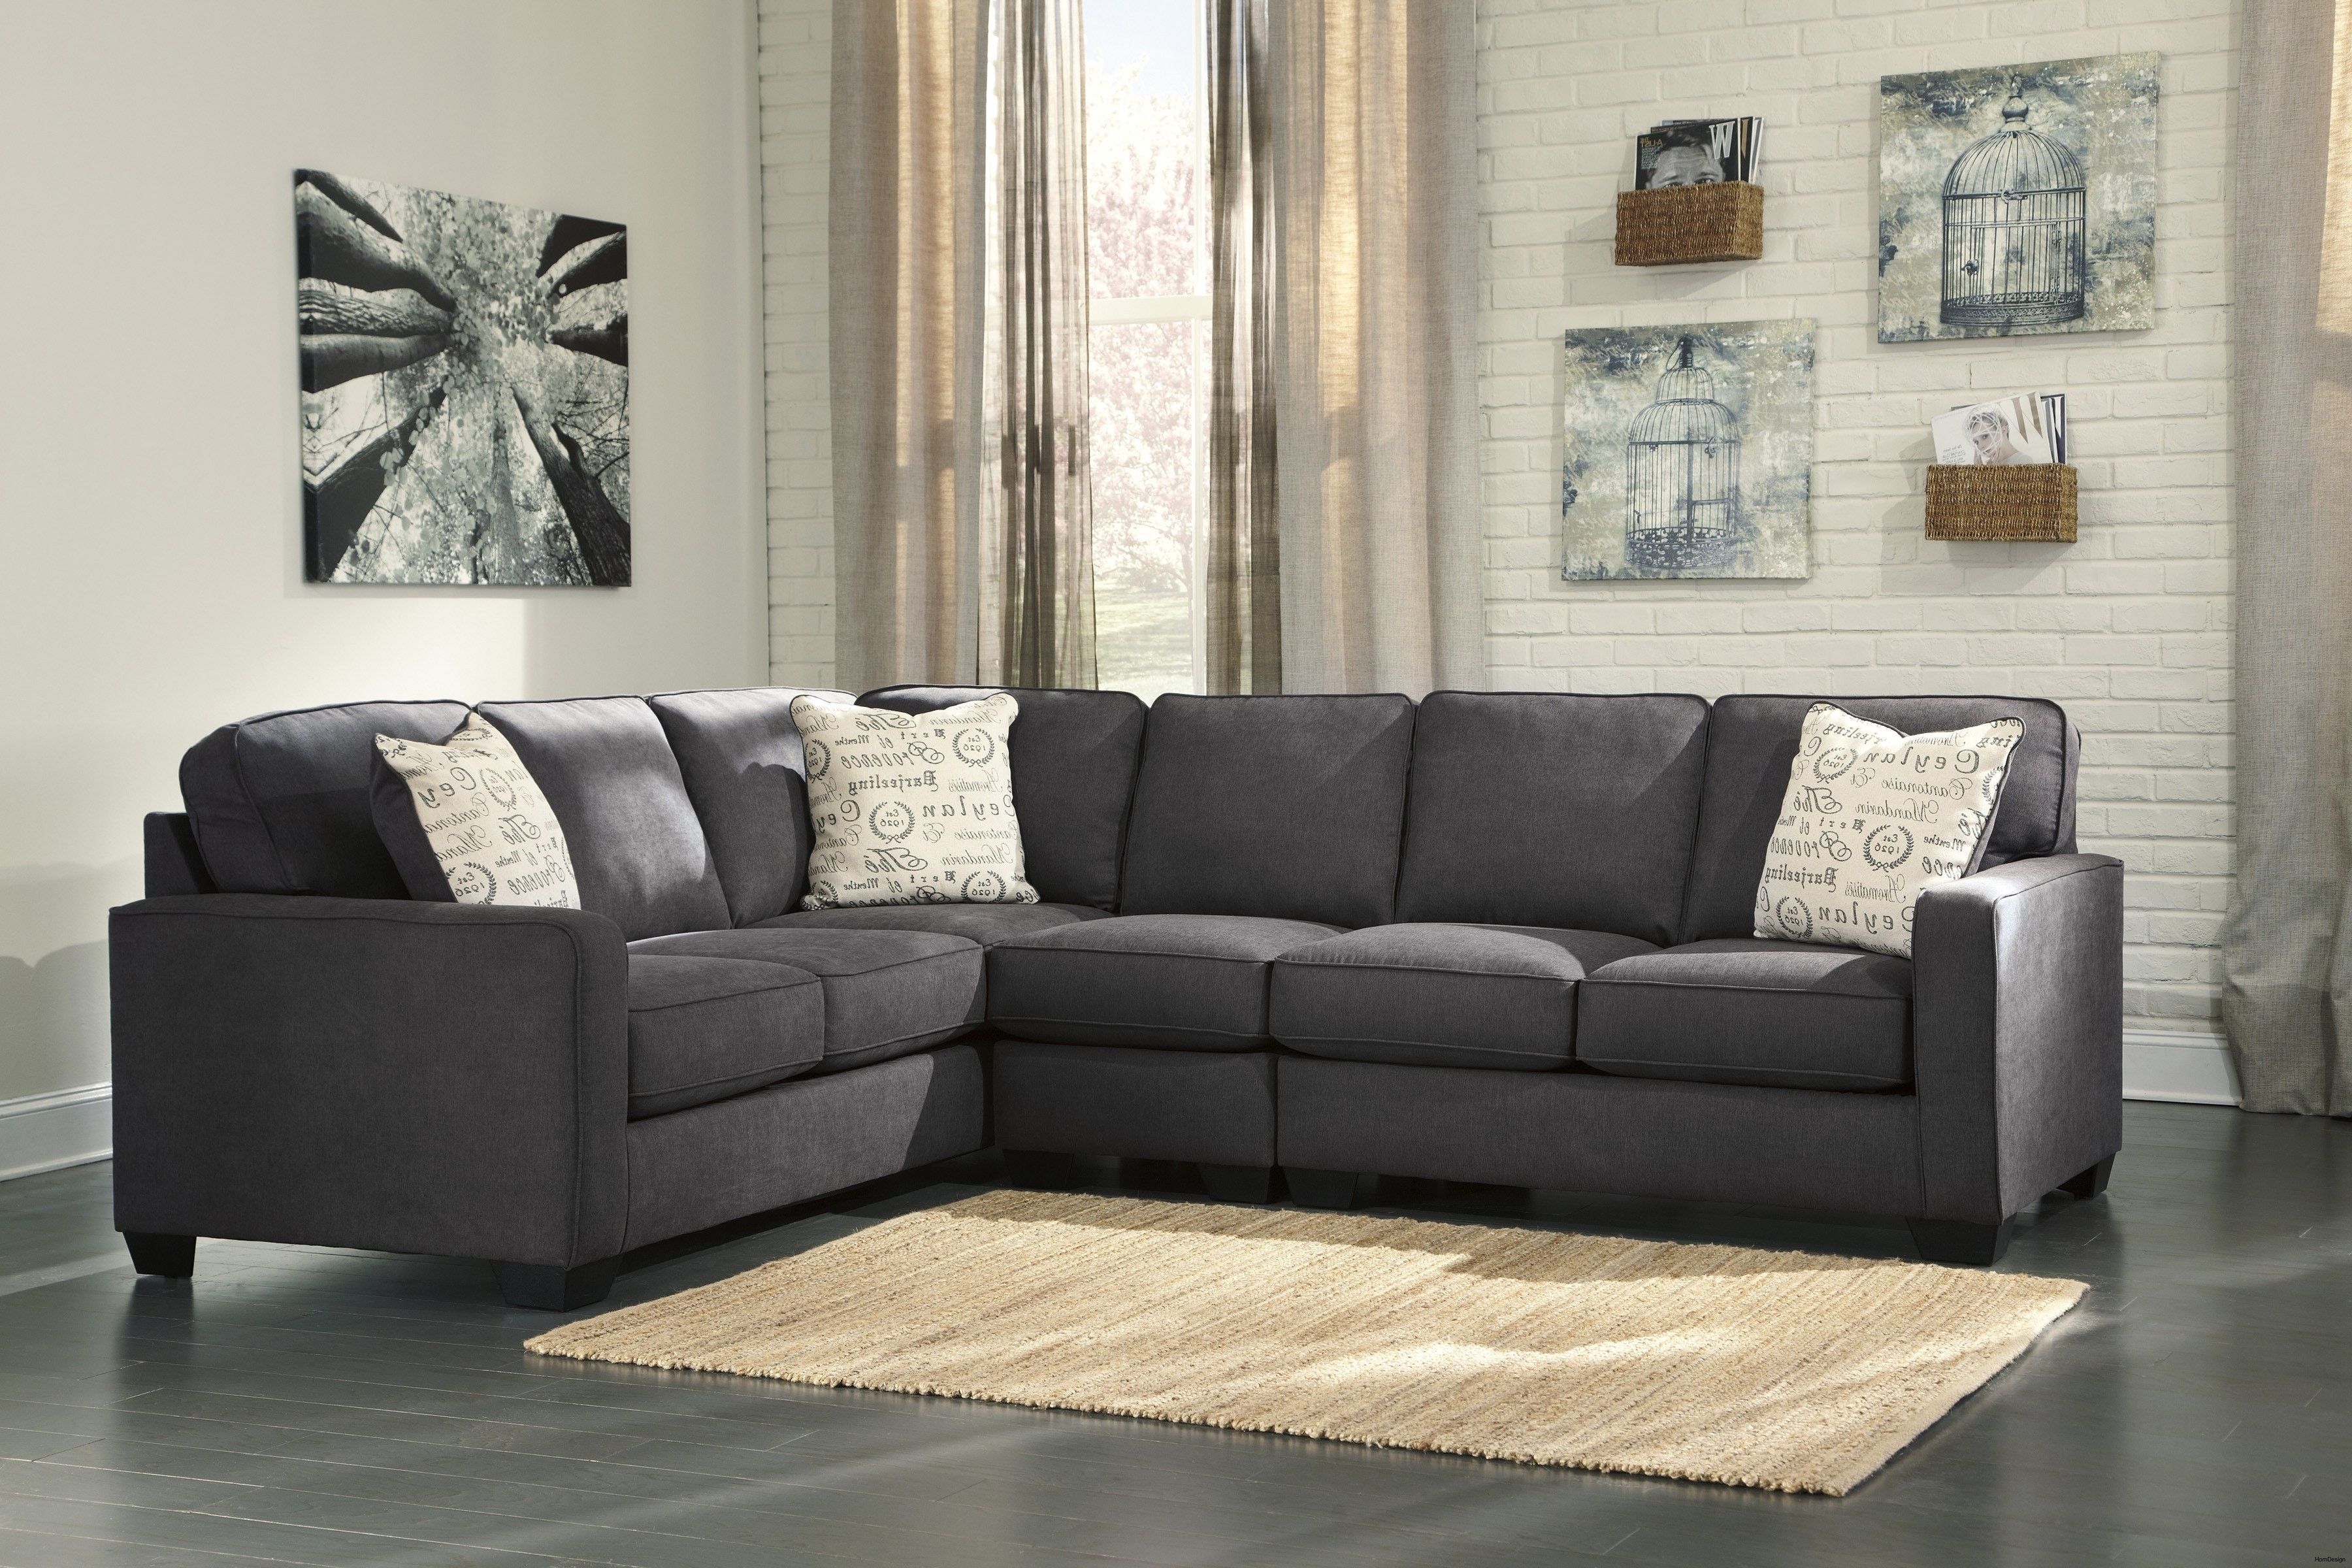 3 Piece Sectional Sofa With Chaise Reviews | Baci Living Room Intended For Meyer 3 Piece Sectionals With Laf Chaise (View 30 of 30)